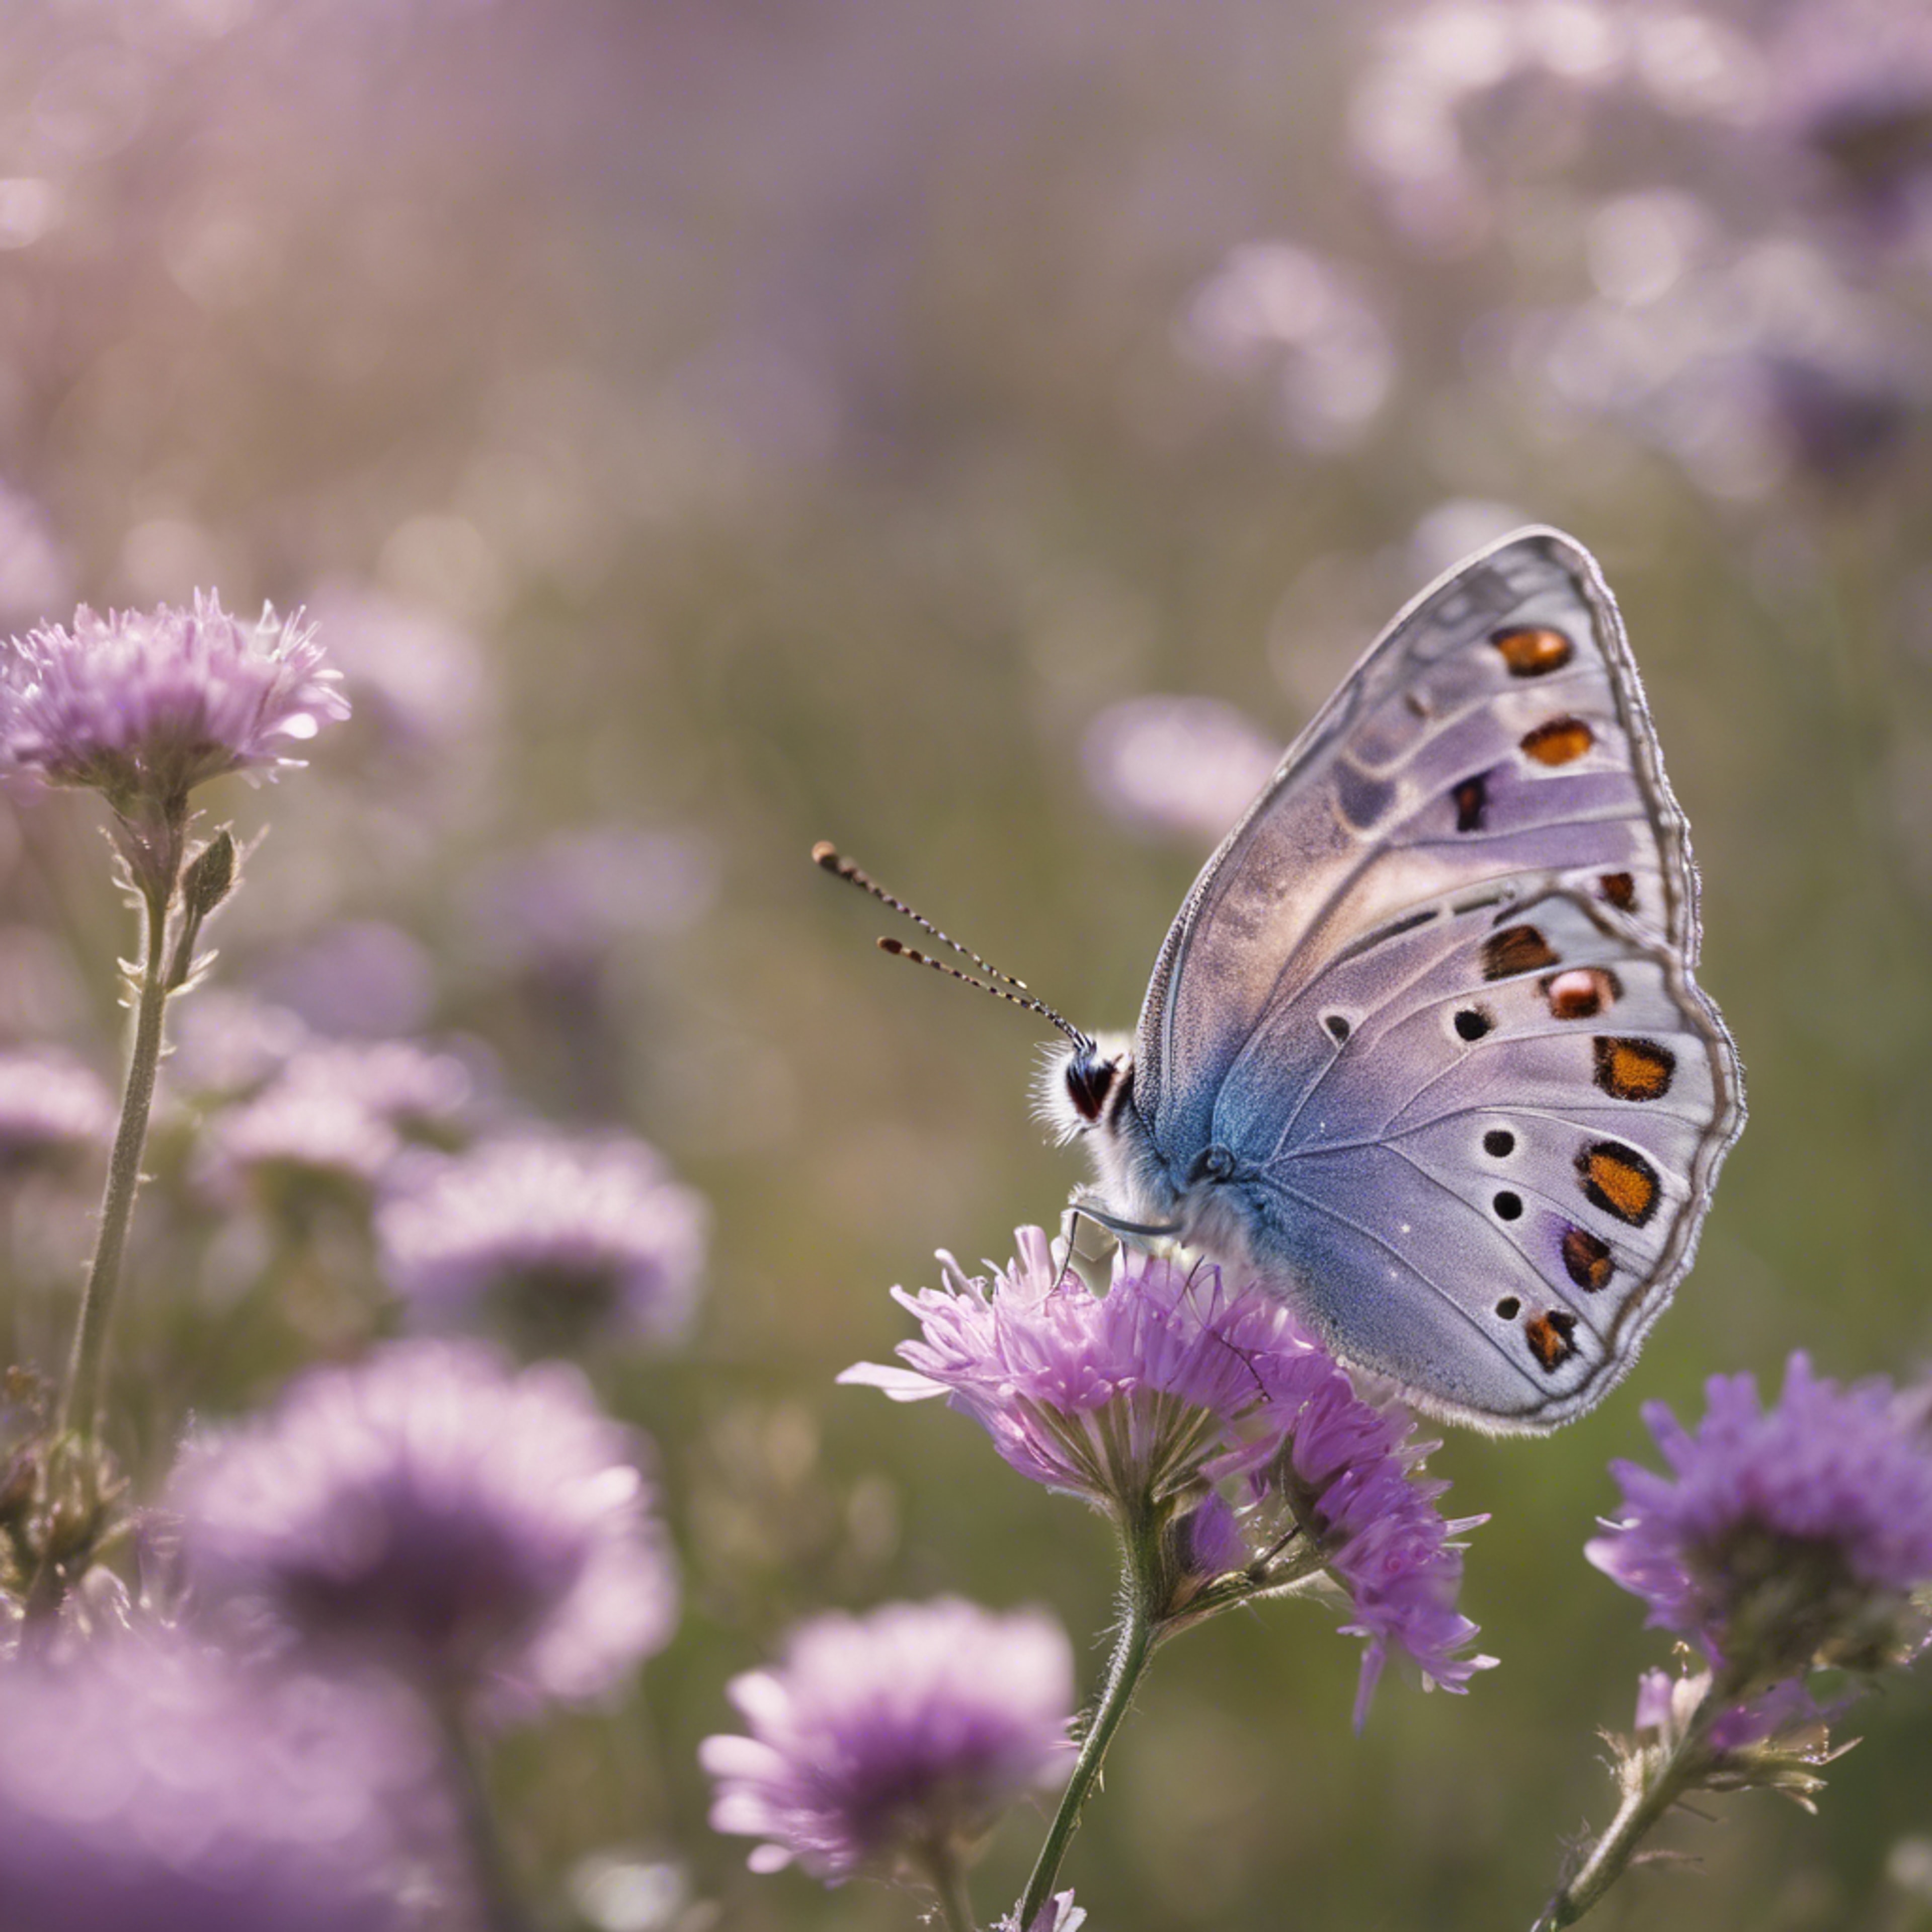 A playful light purple butterfly fluttering freely amidst wildflowers. Hintergrund[992811f2a8e14925b1c6]